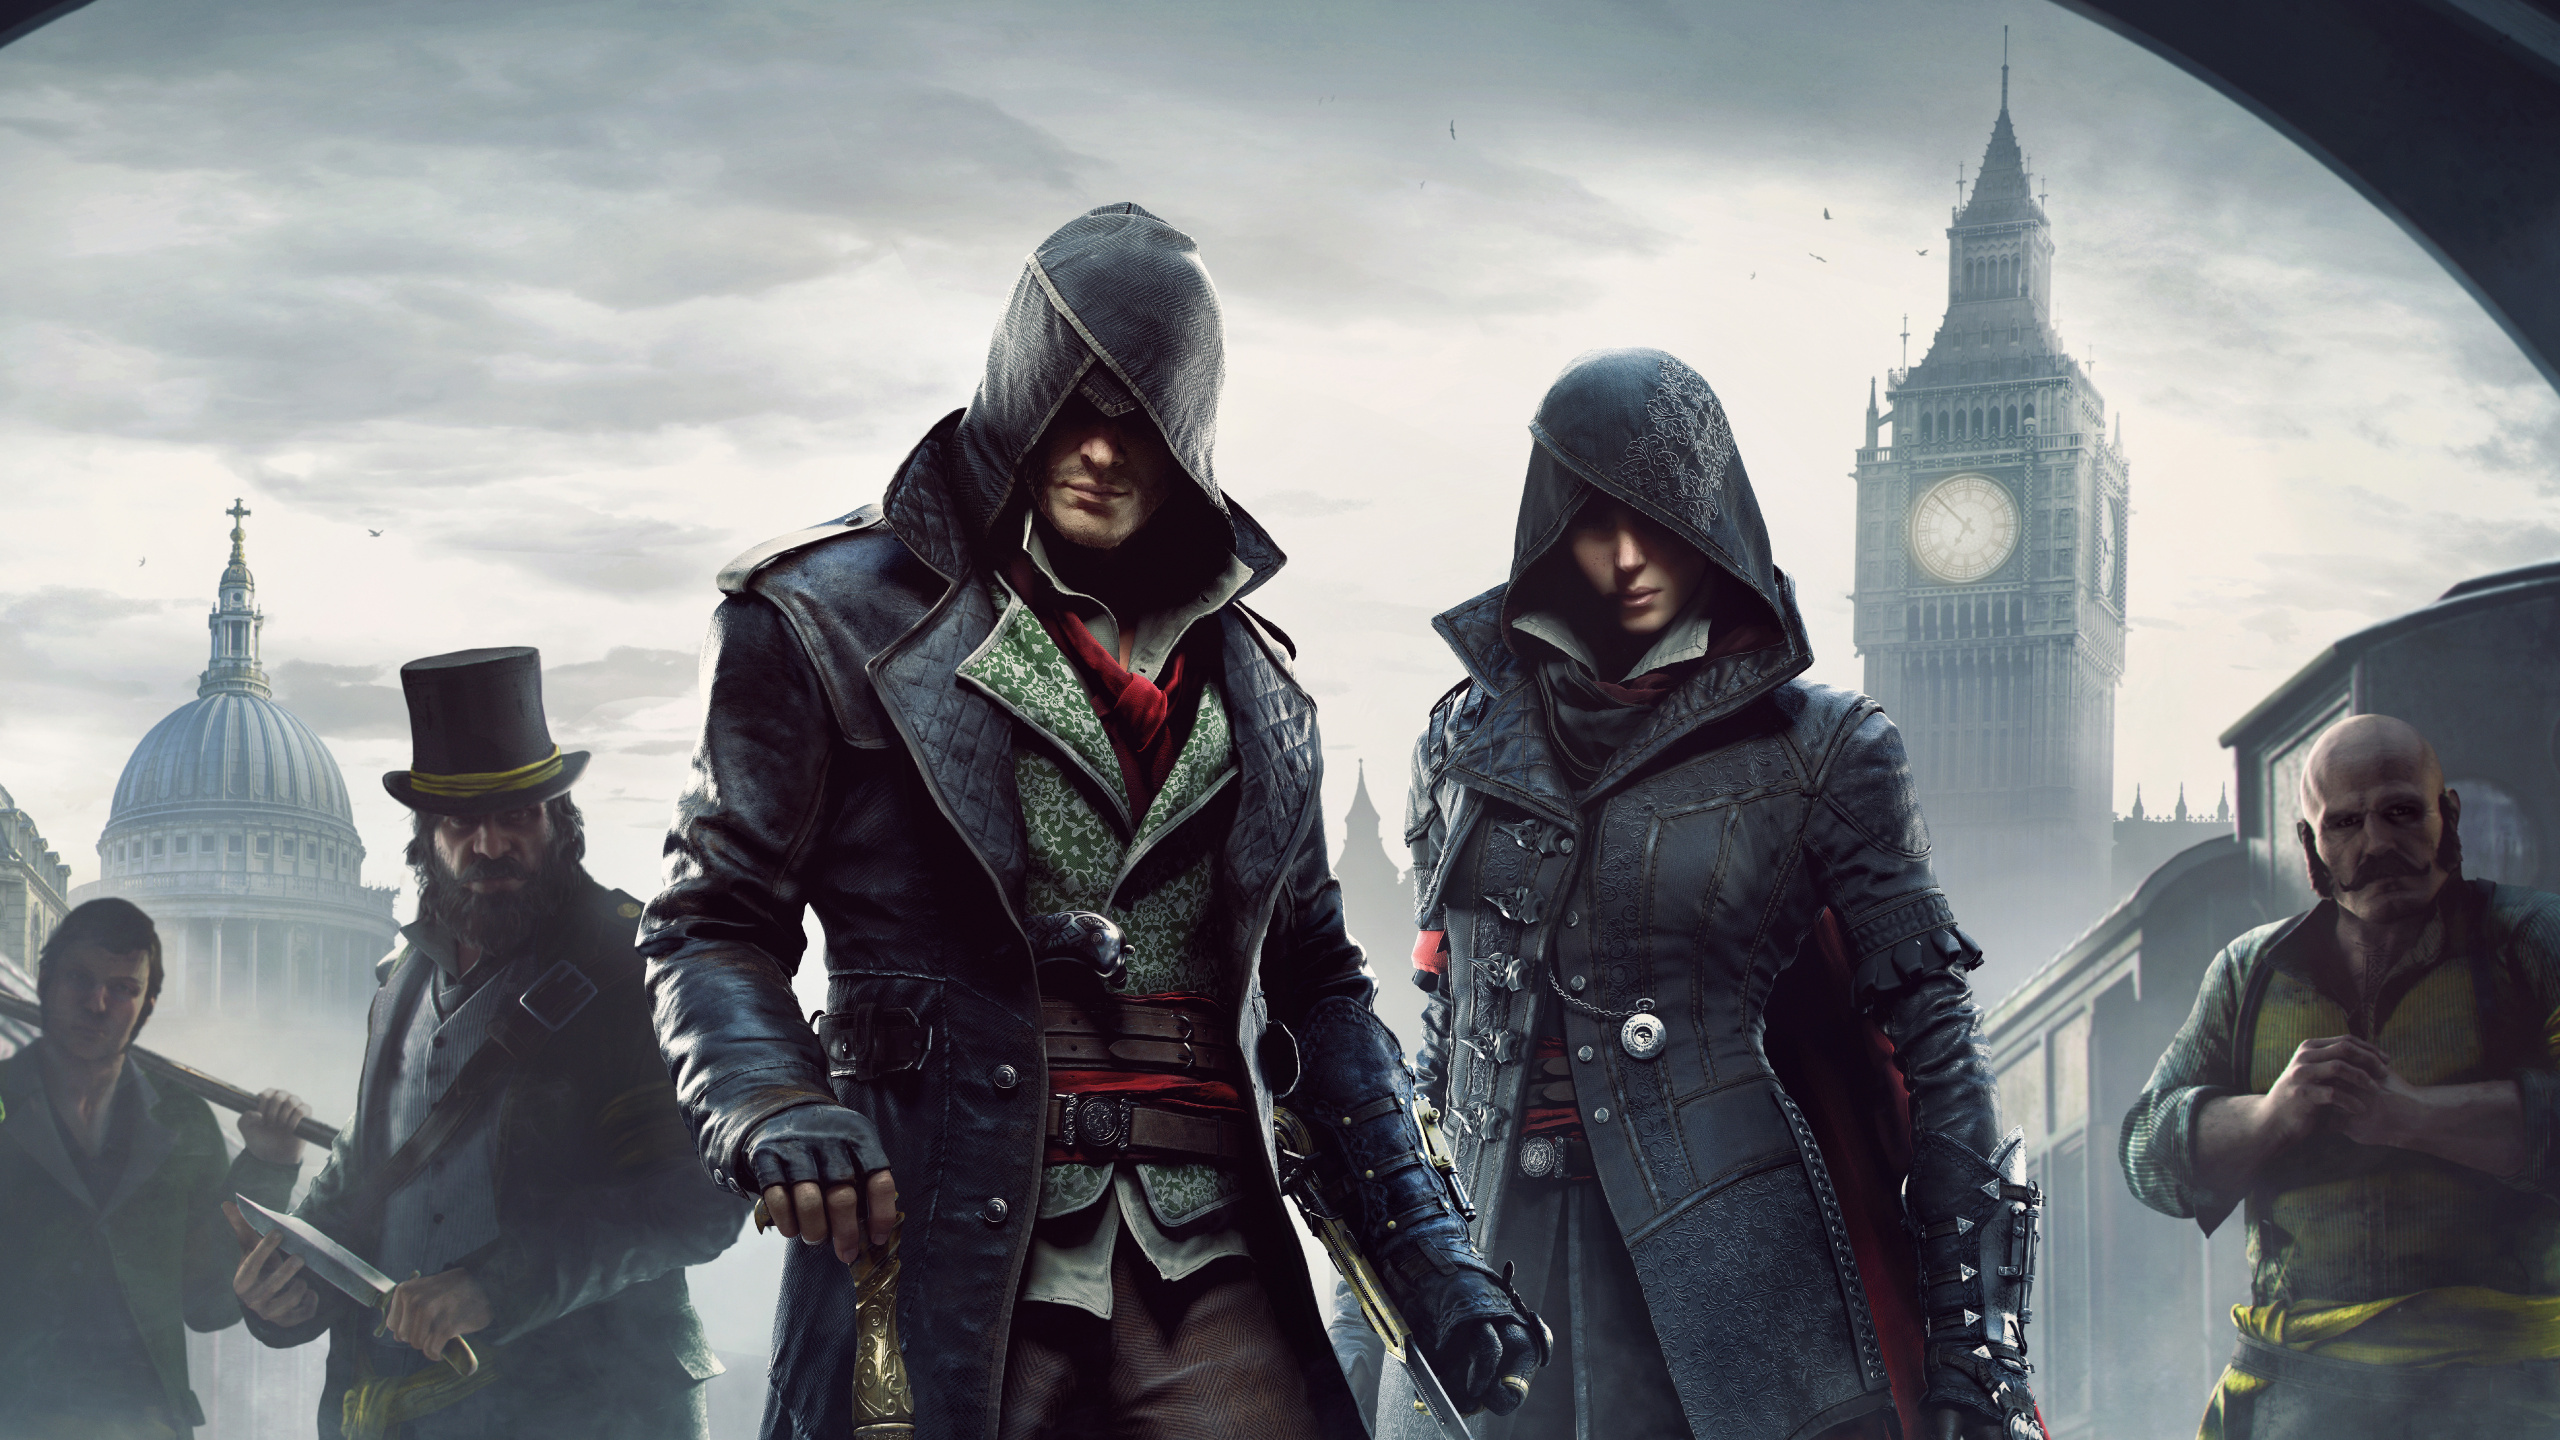 Assassins Creed Syndicate, Ubisoft, Pc-Spiel, Film, Assassins Creed Unity. Wallpaper in 2560x1440 Resolution